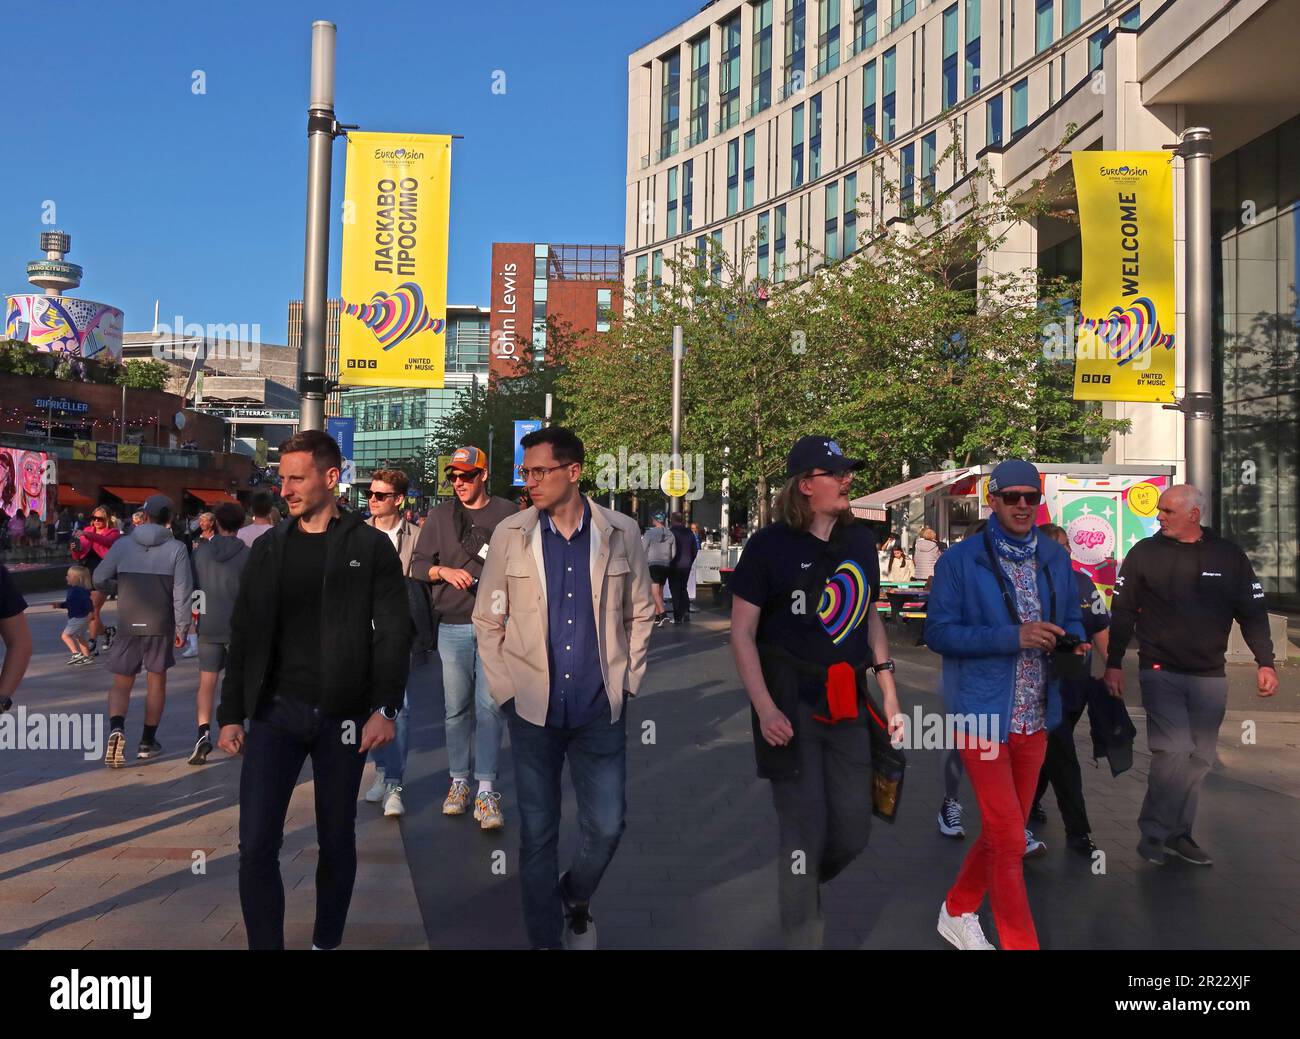 Liverpool One, welcome to Eurovision 2023, publicity, crowd, crowded, fan, fans, lads, Paradise Street, Liverpool, Merseyside, England, UK, L1 8LT Stock Photo